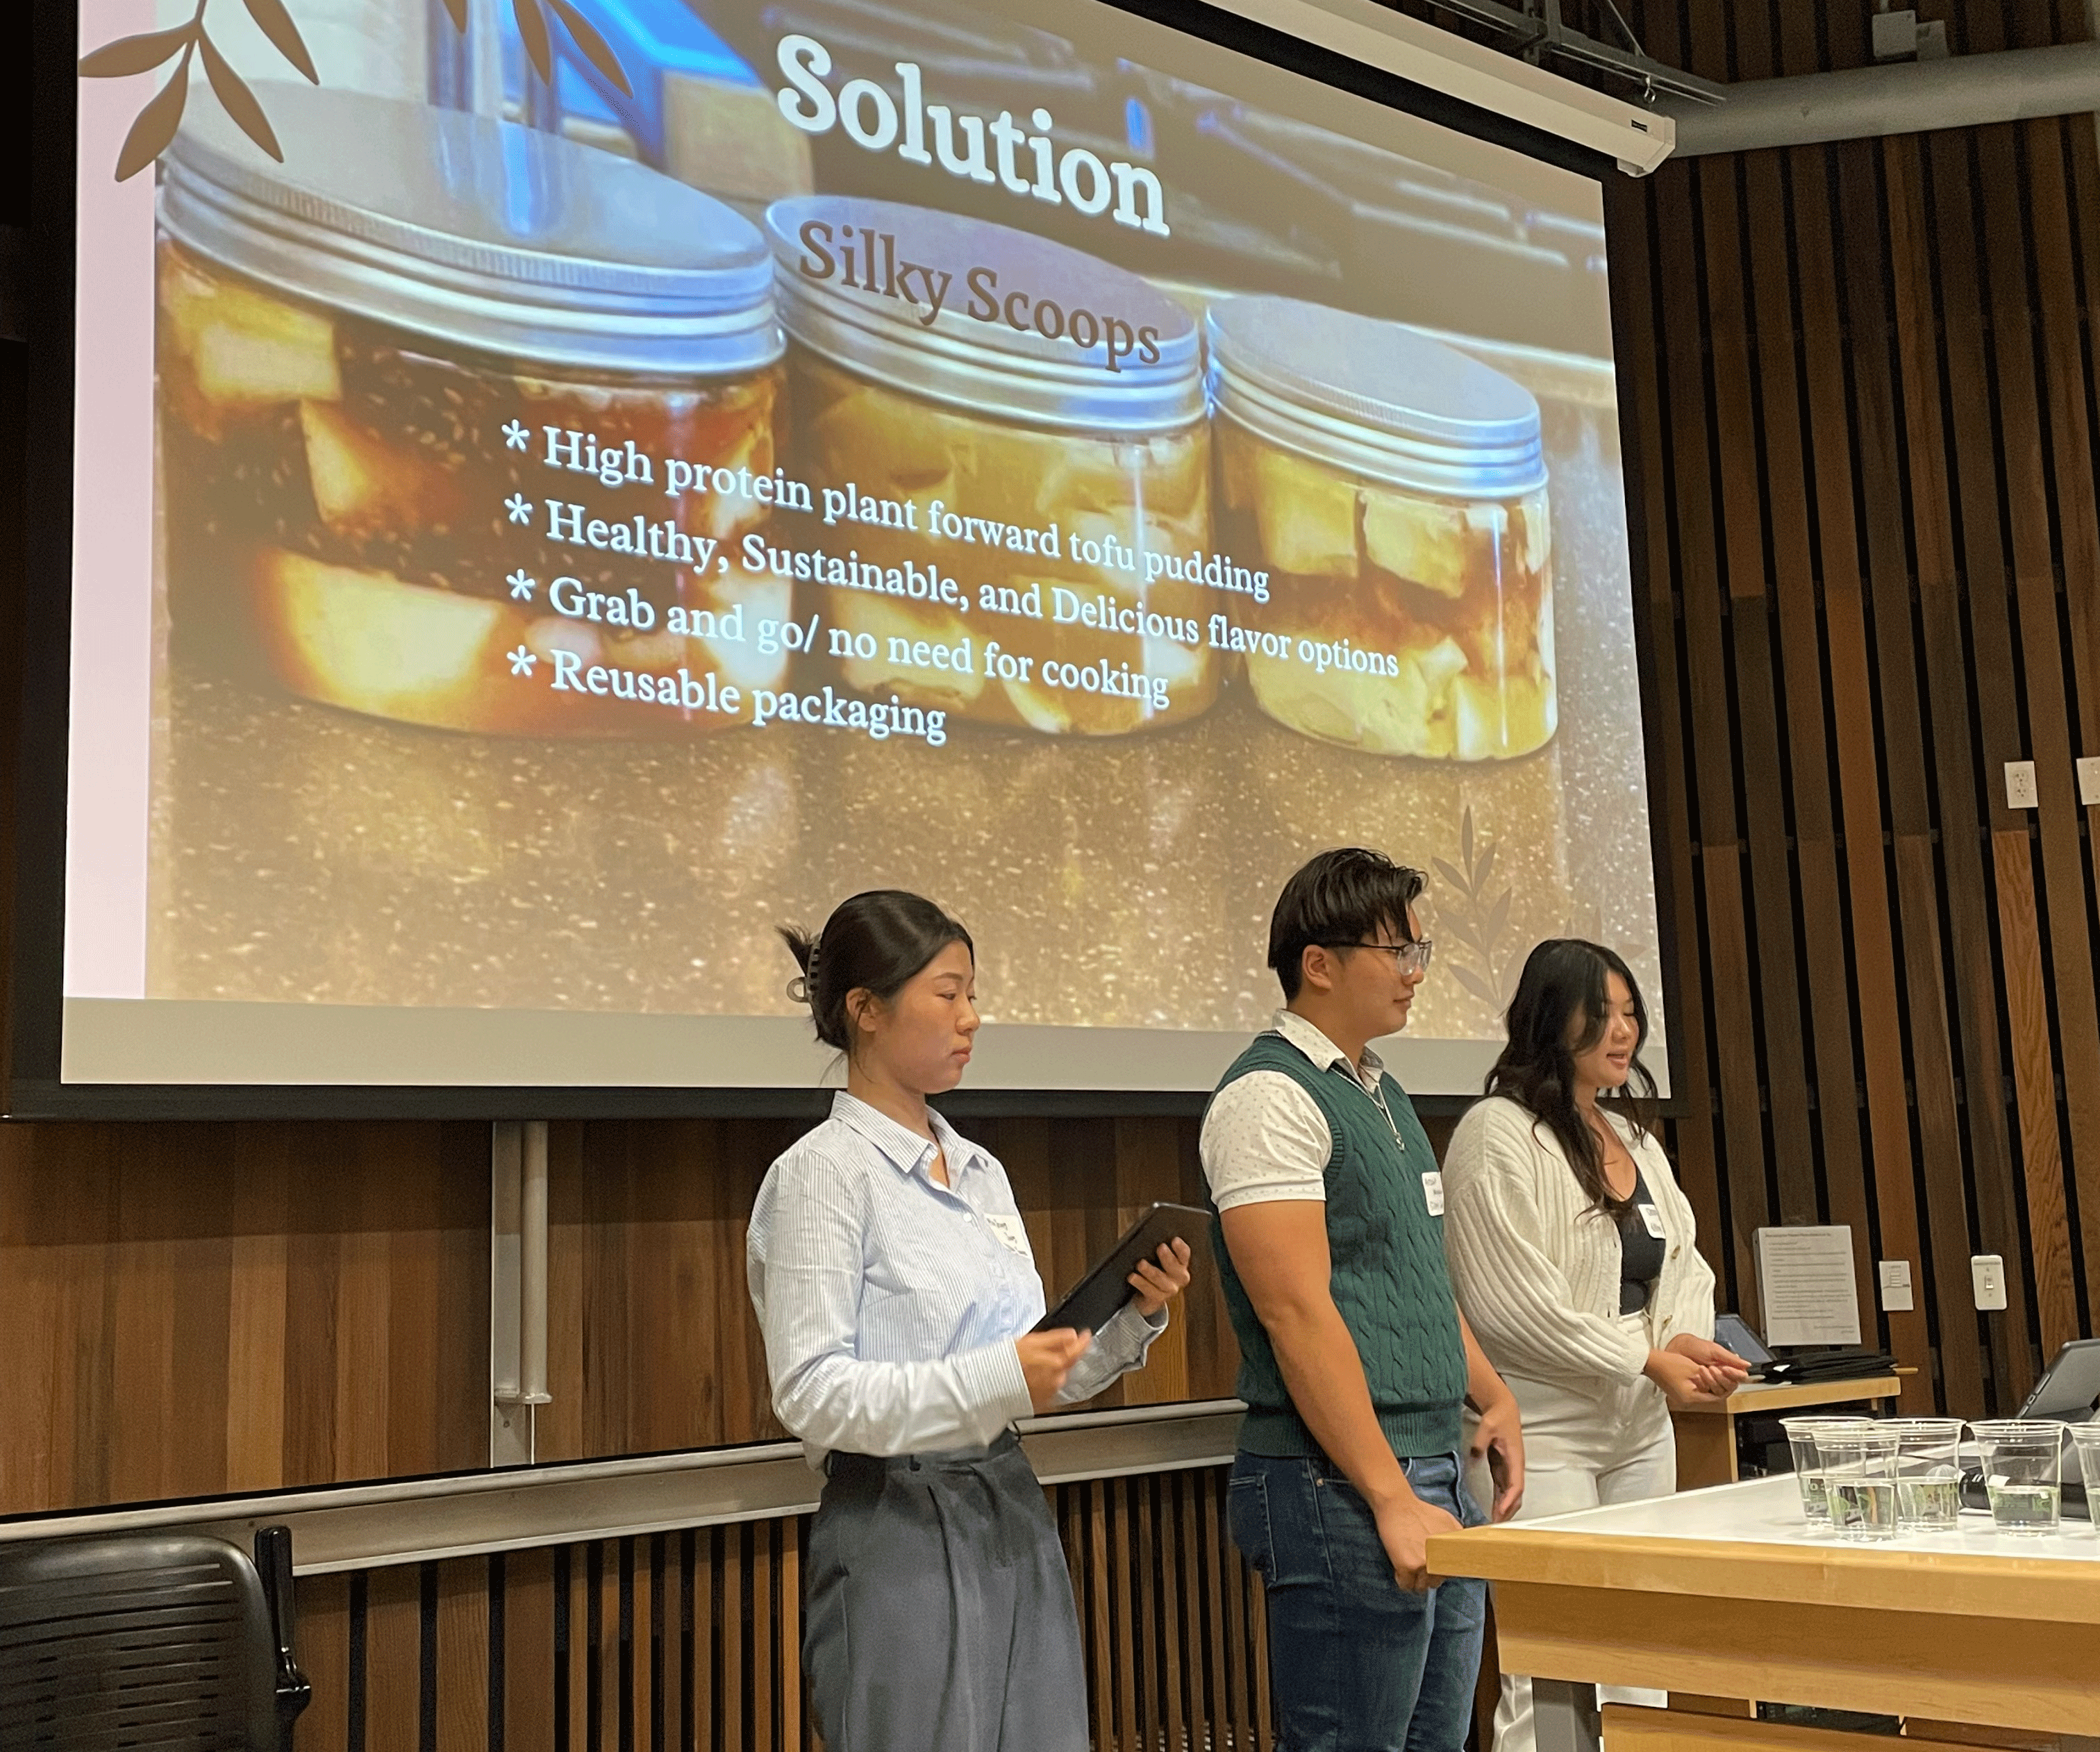 “Silky Scoops” team presenting their product at the event.